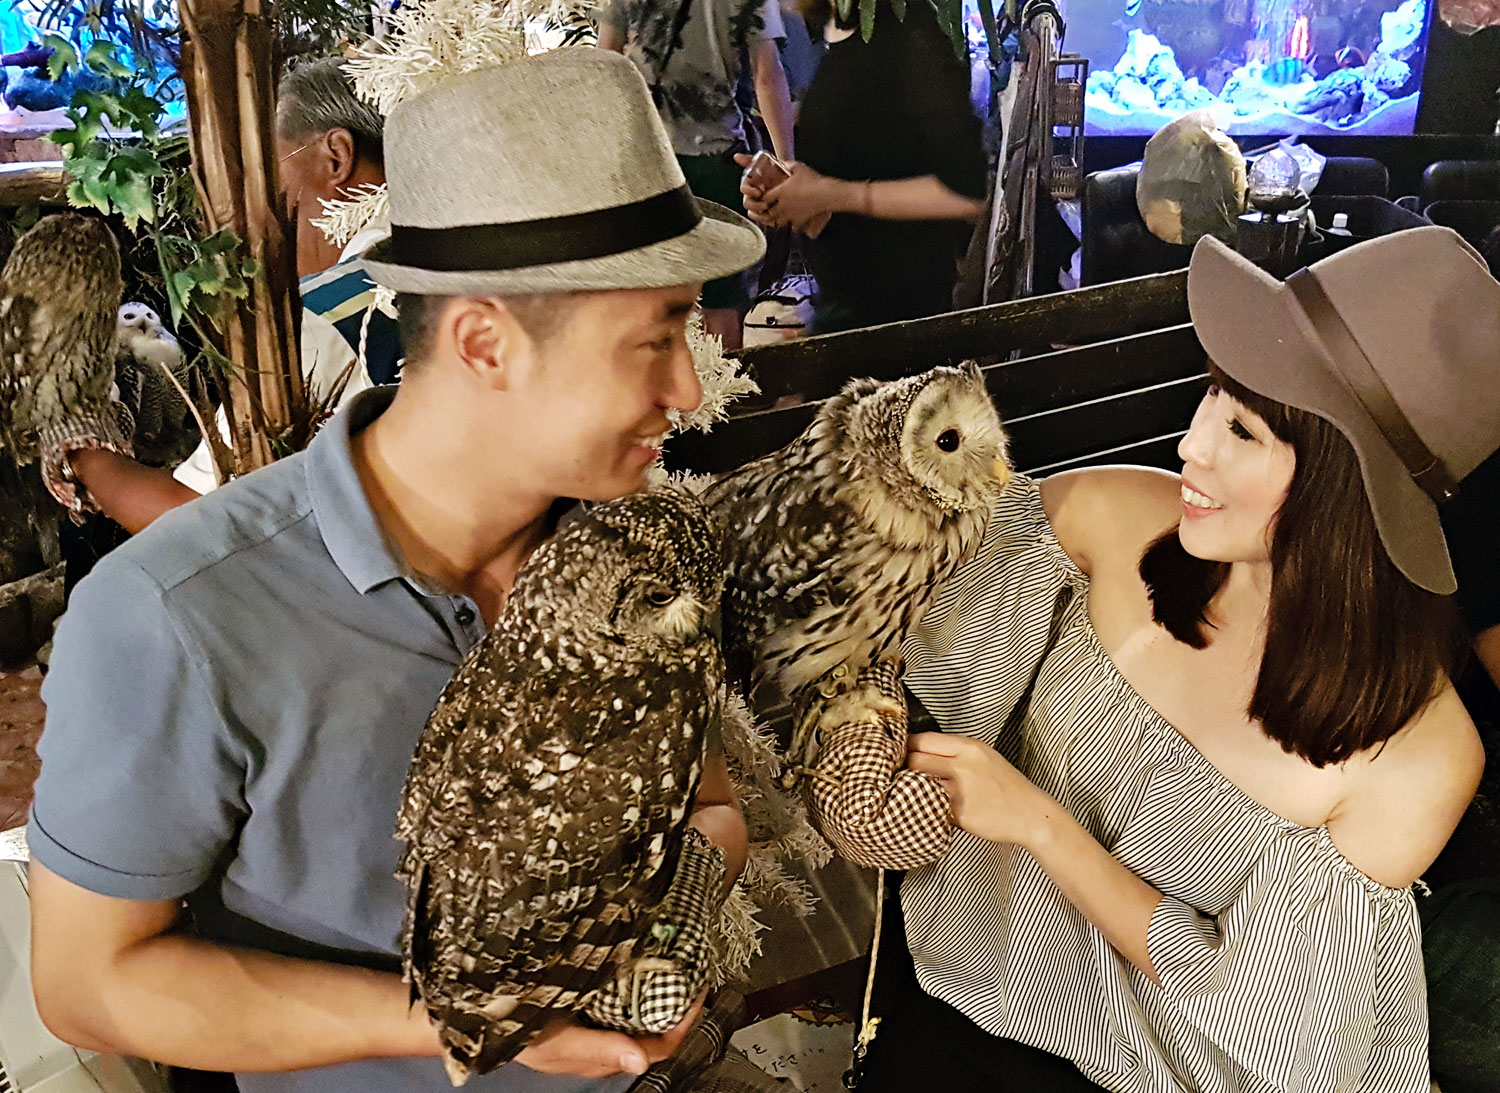 Forest of Owl - Owl cafe in Tokyo